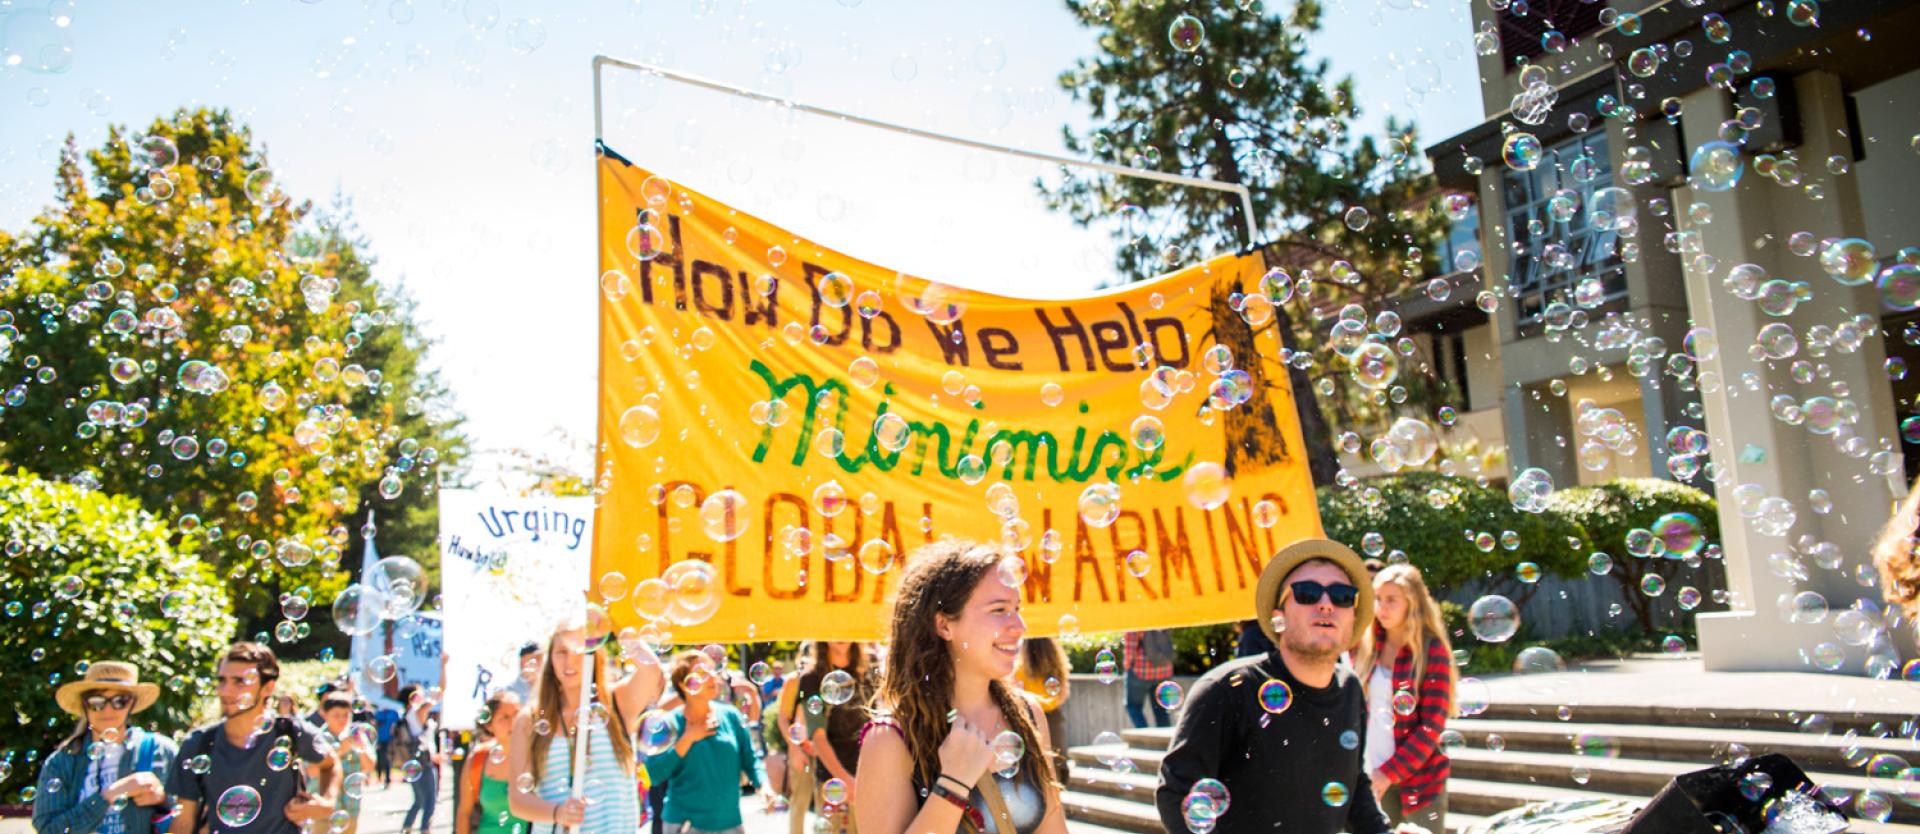 Students carrying a big yellow banner about global warming